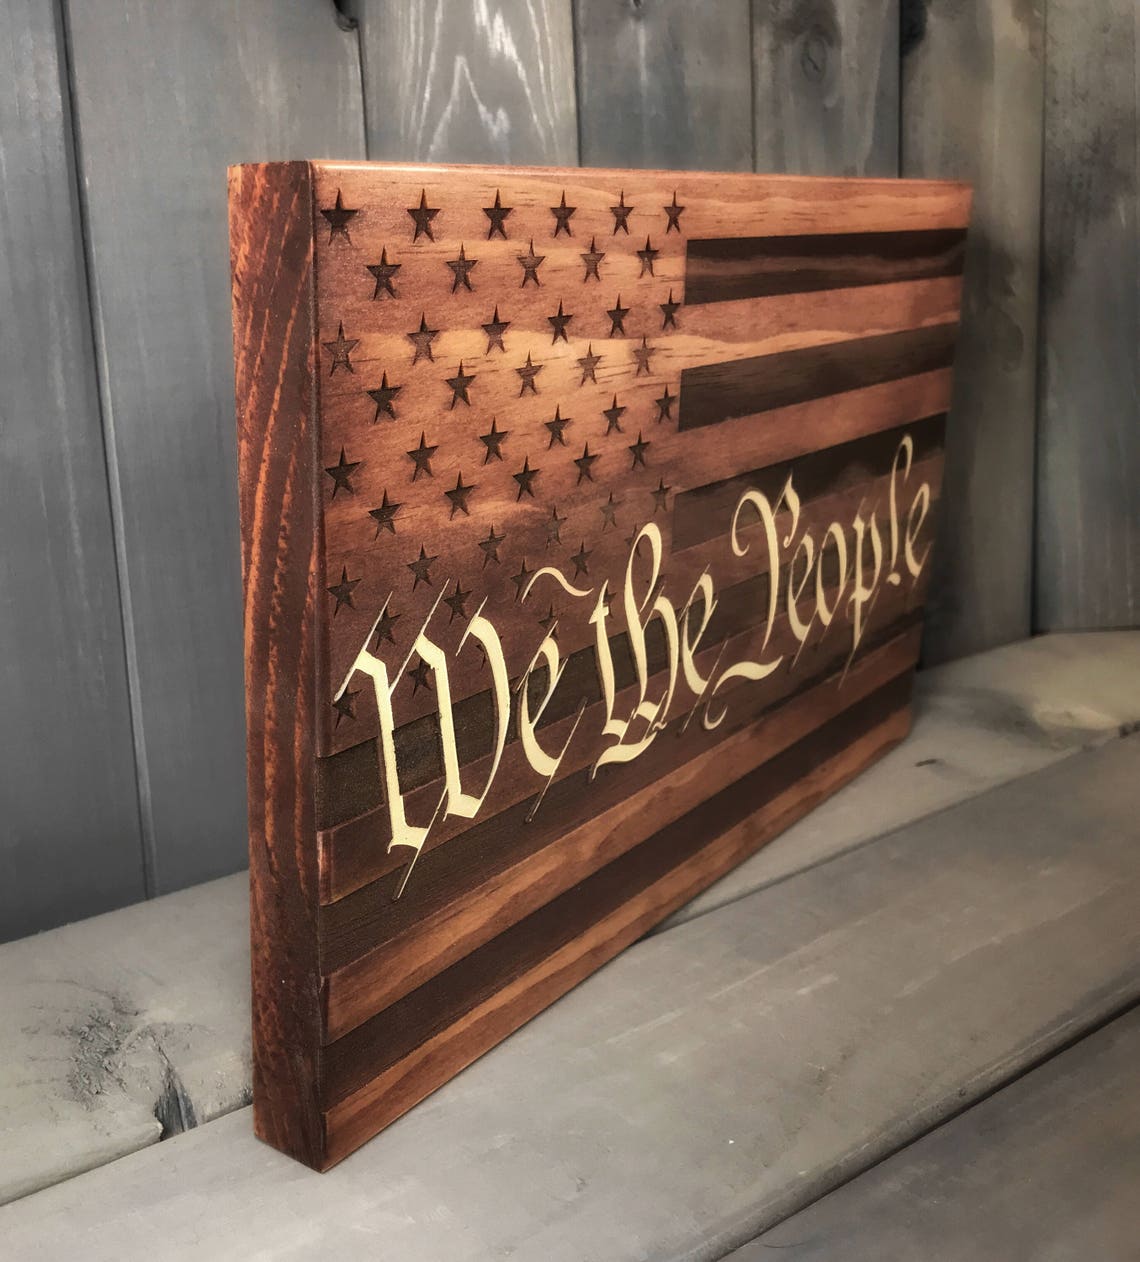 We the People Wood Sign